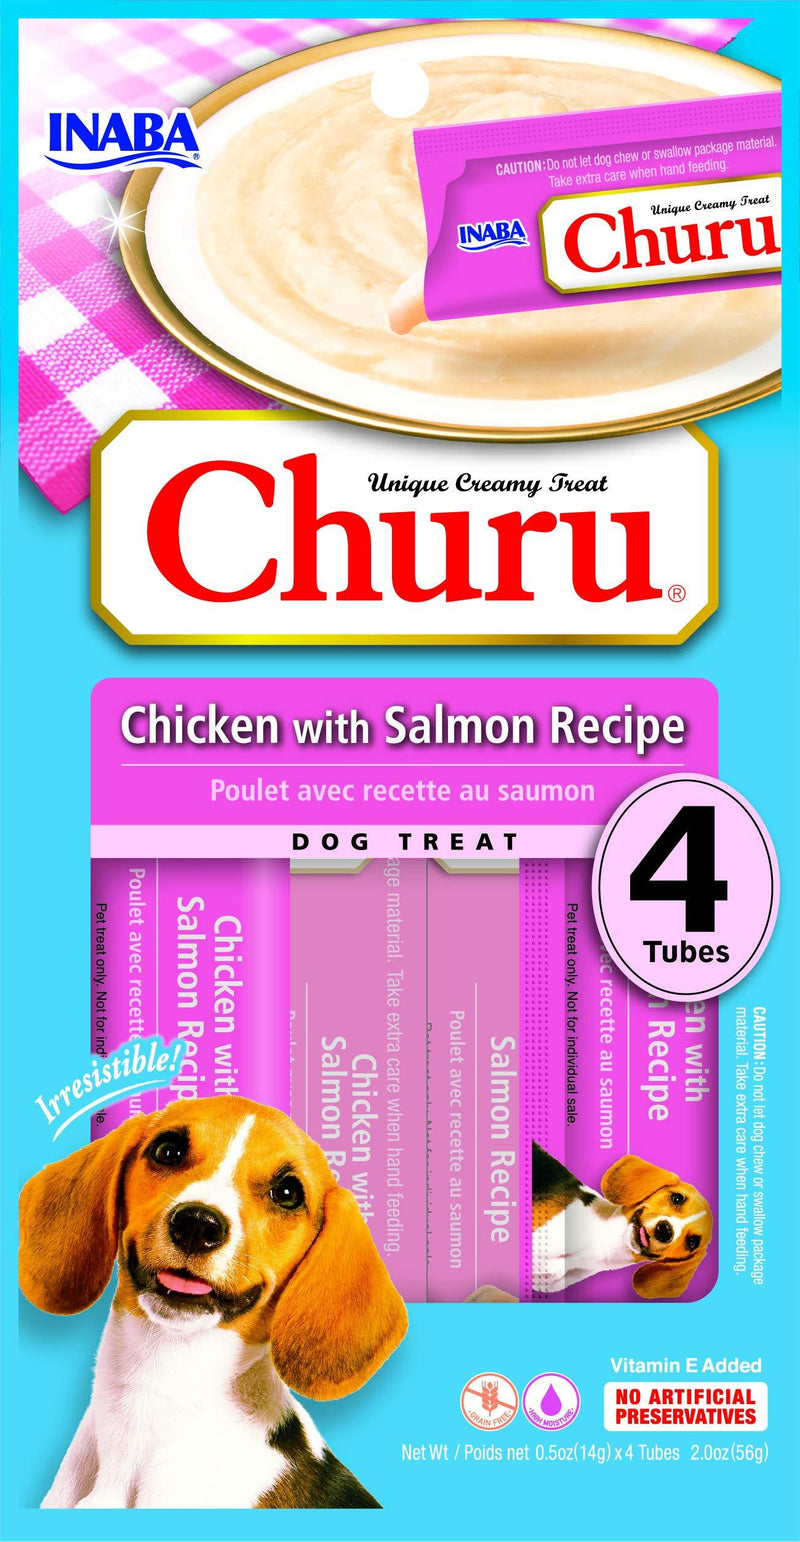 [Australia] - Churu Lickable Treat for Dogs - Chicken with Salmon Recipe 32 Tubes (8 Packs of 4 Tubes) 